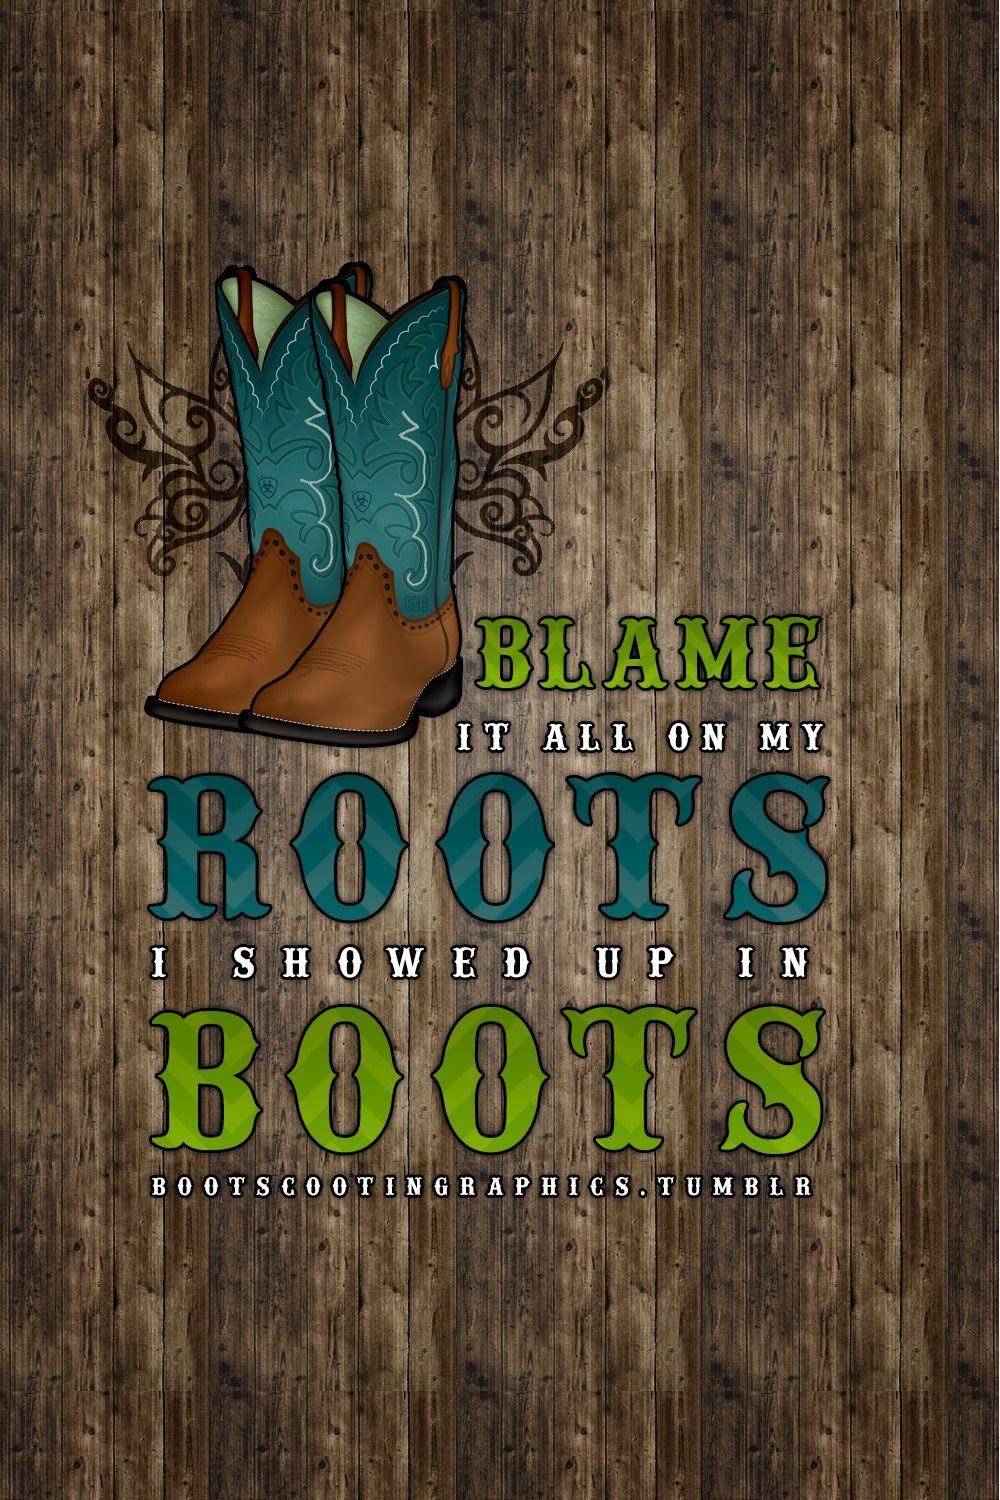 Boot Scootin' Graphics. Country girl .com